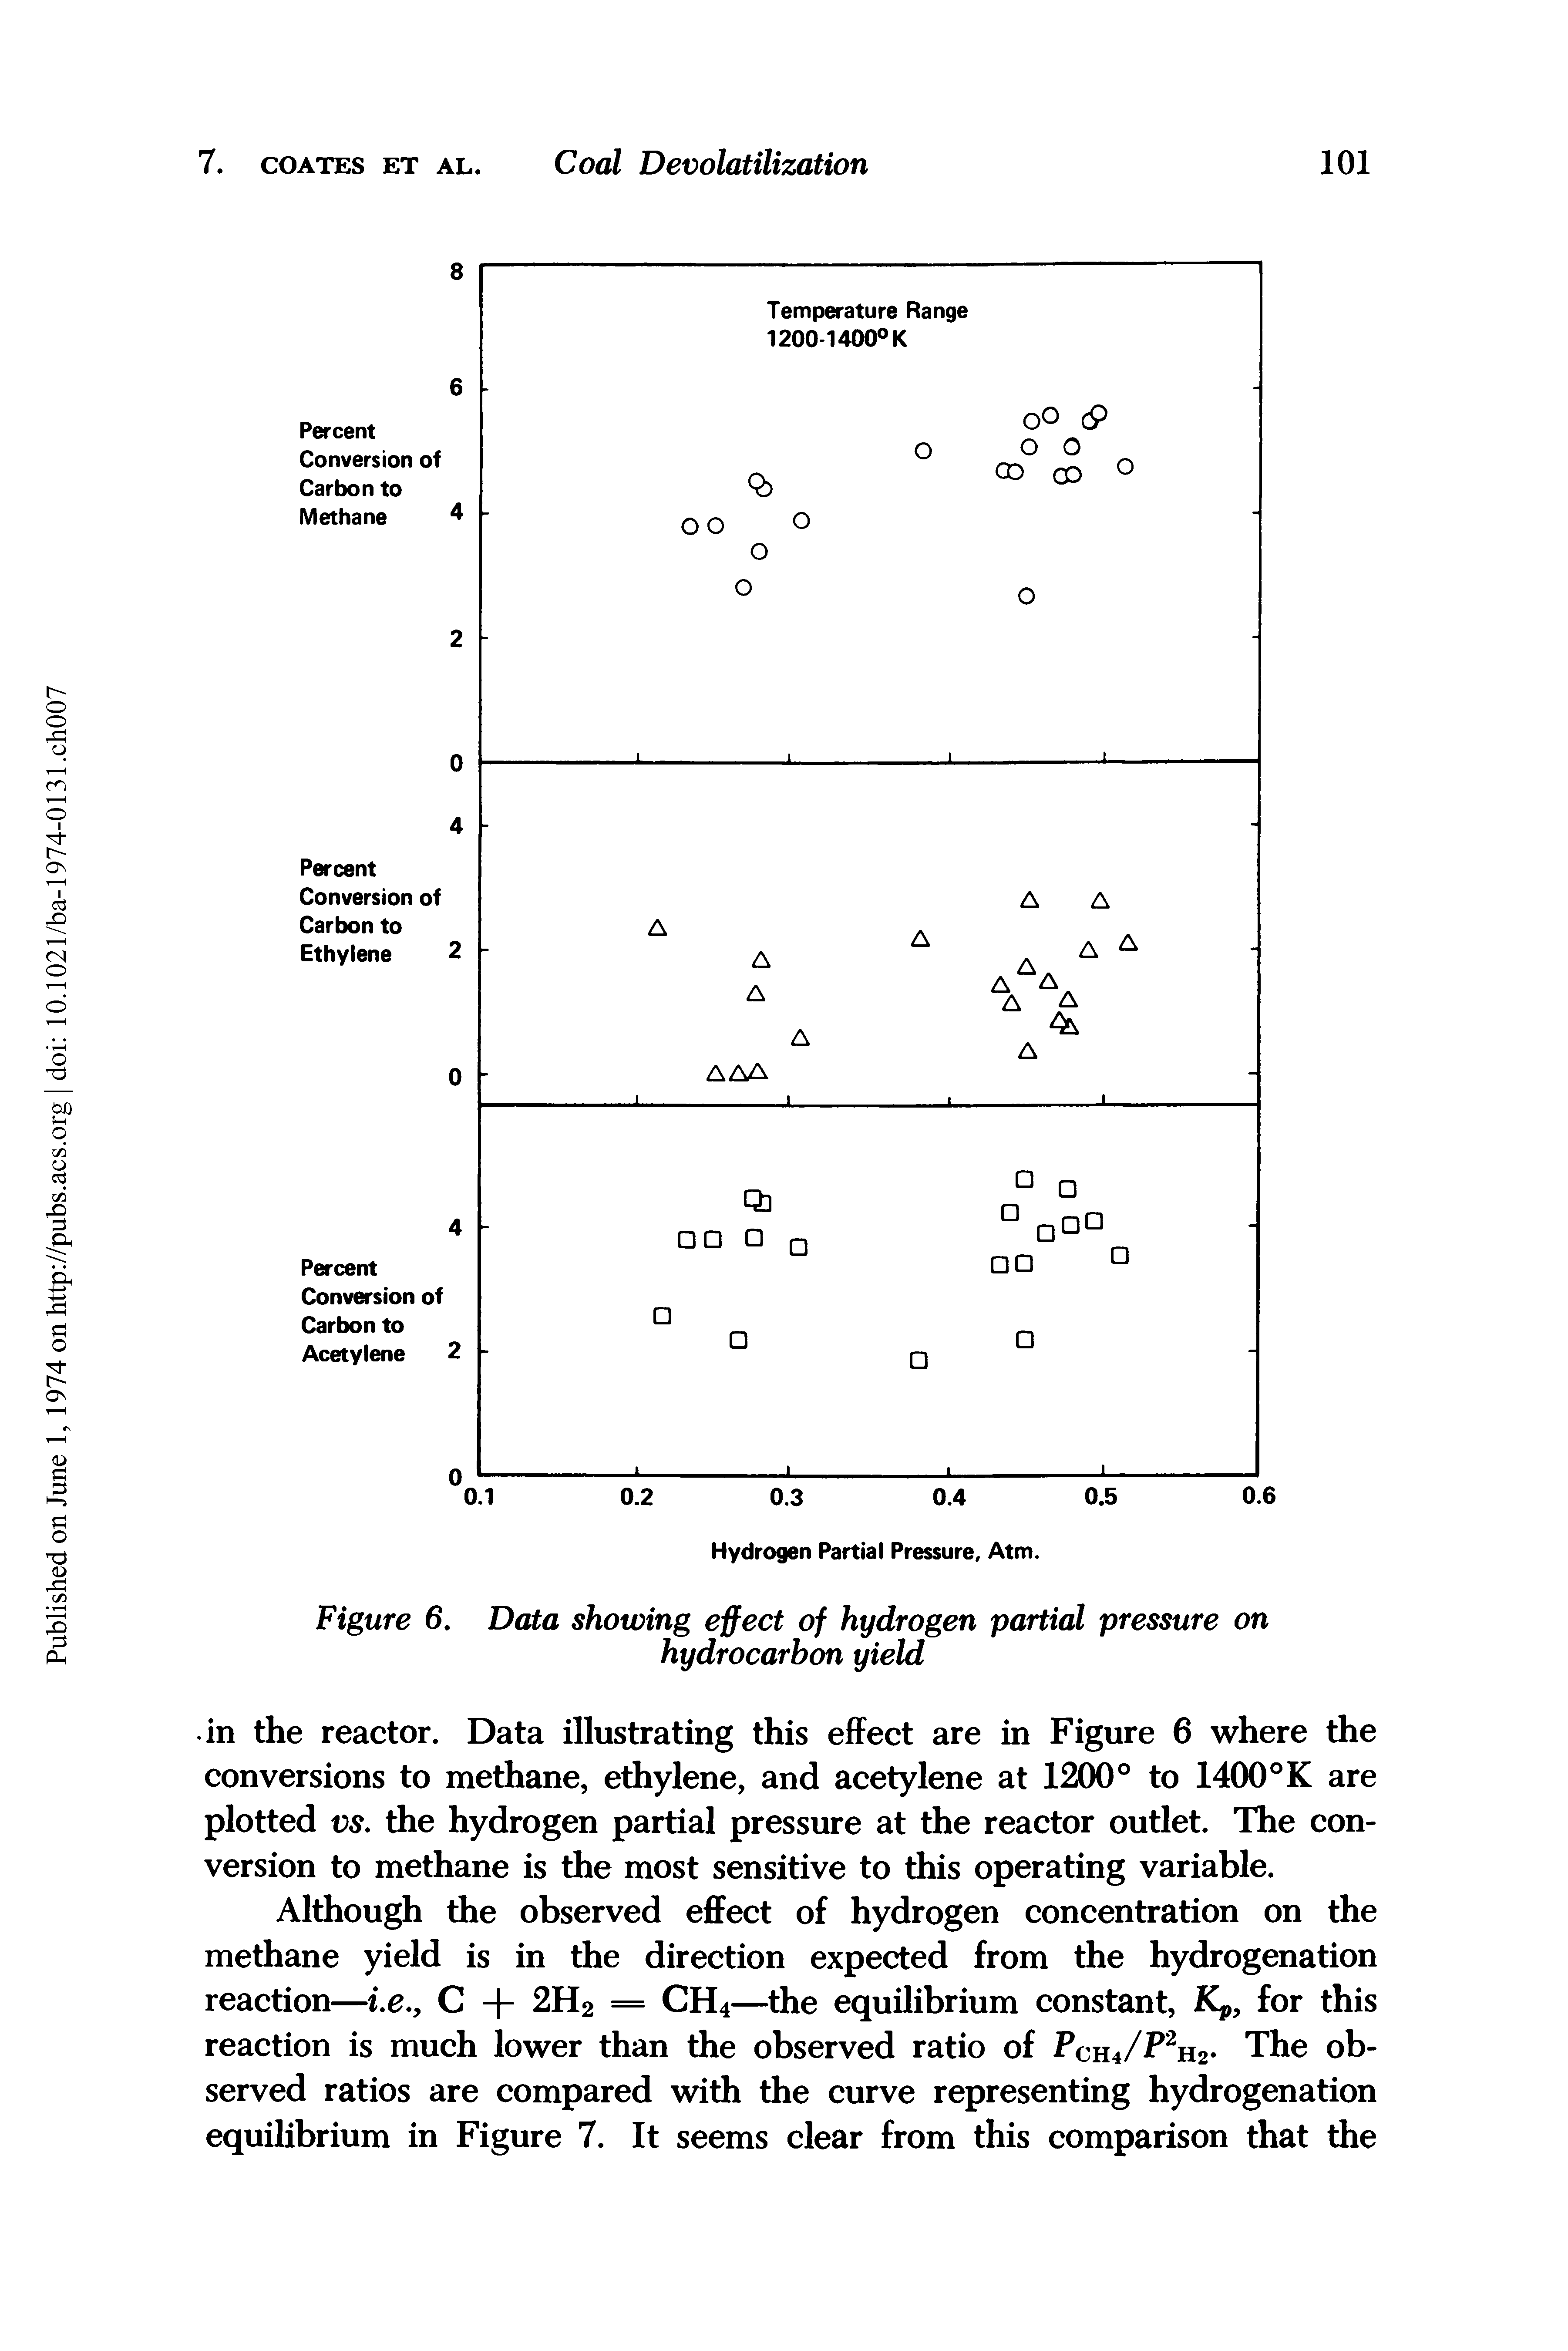 Figure 6. Data showing effect of hydrogen partial pressure on hydrocarbon yield...